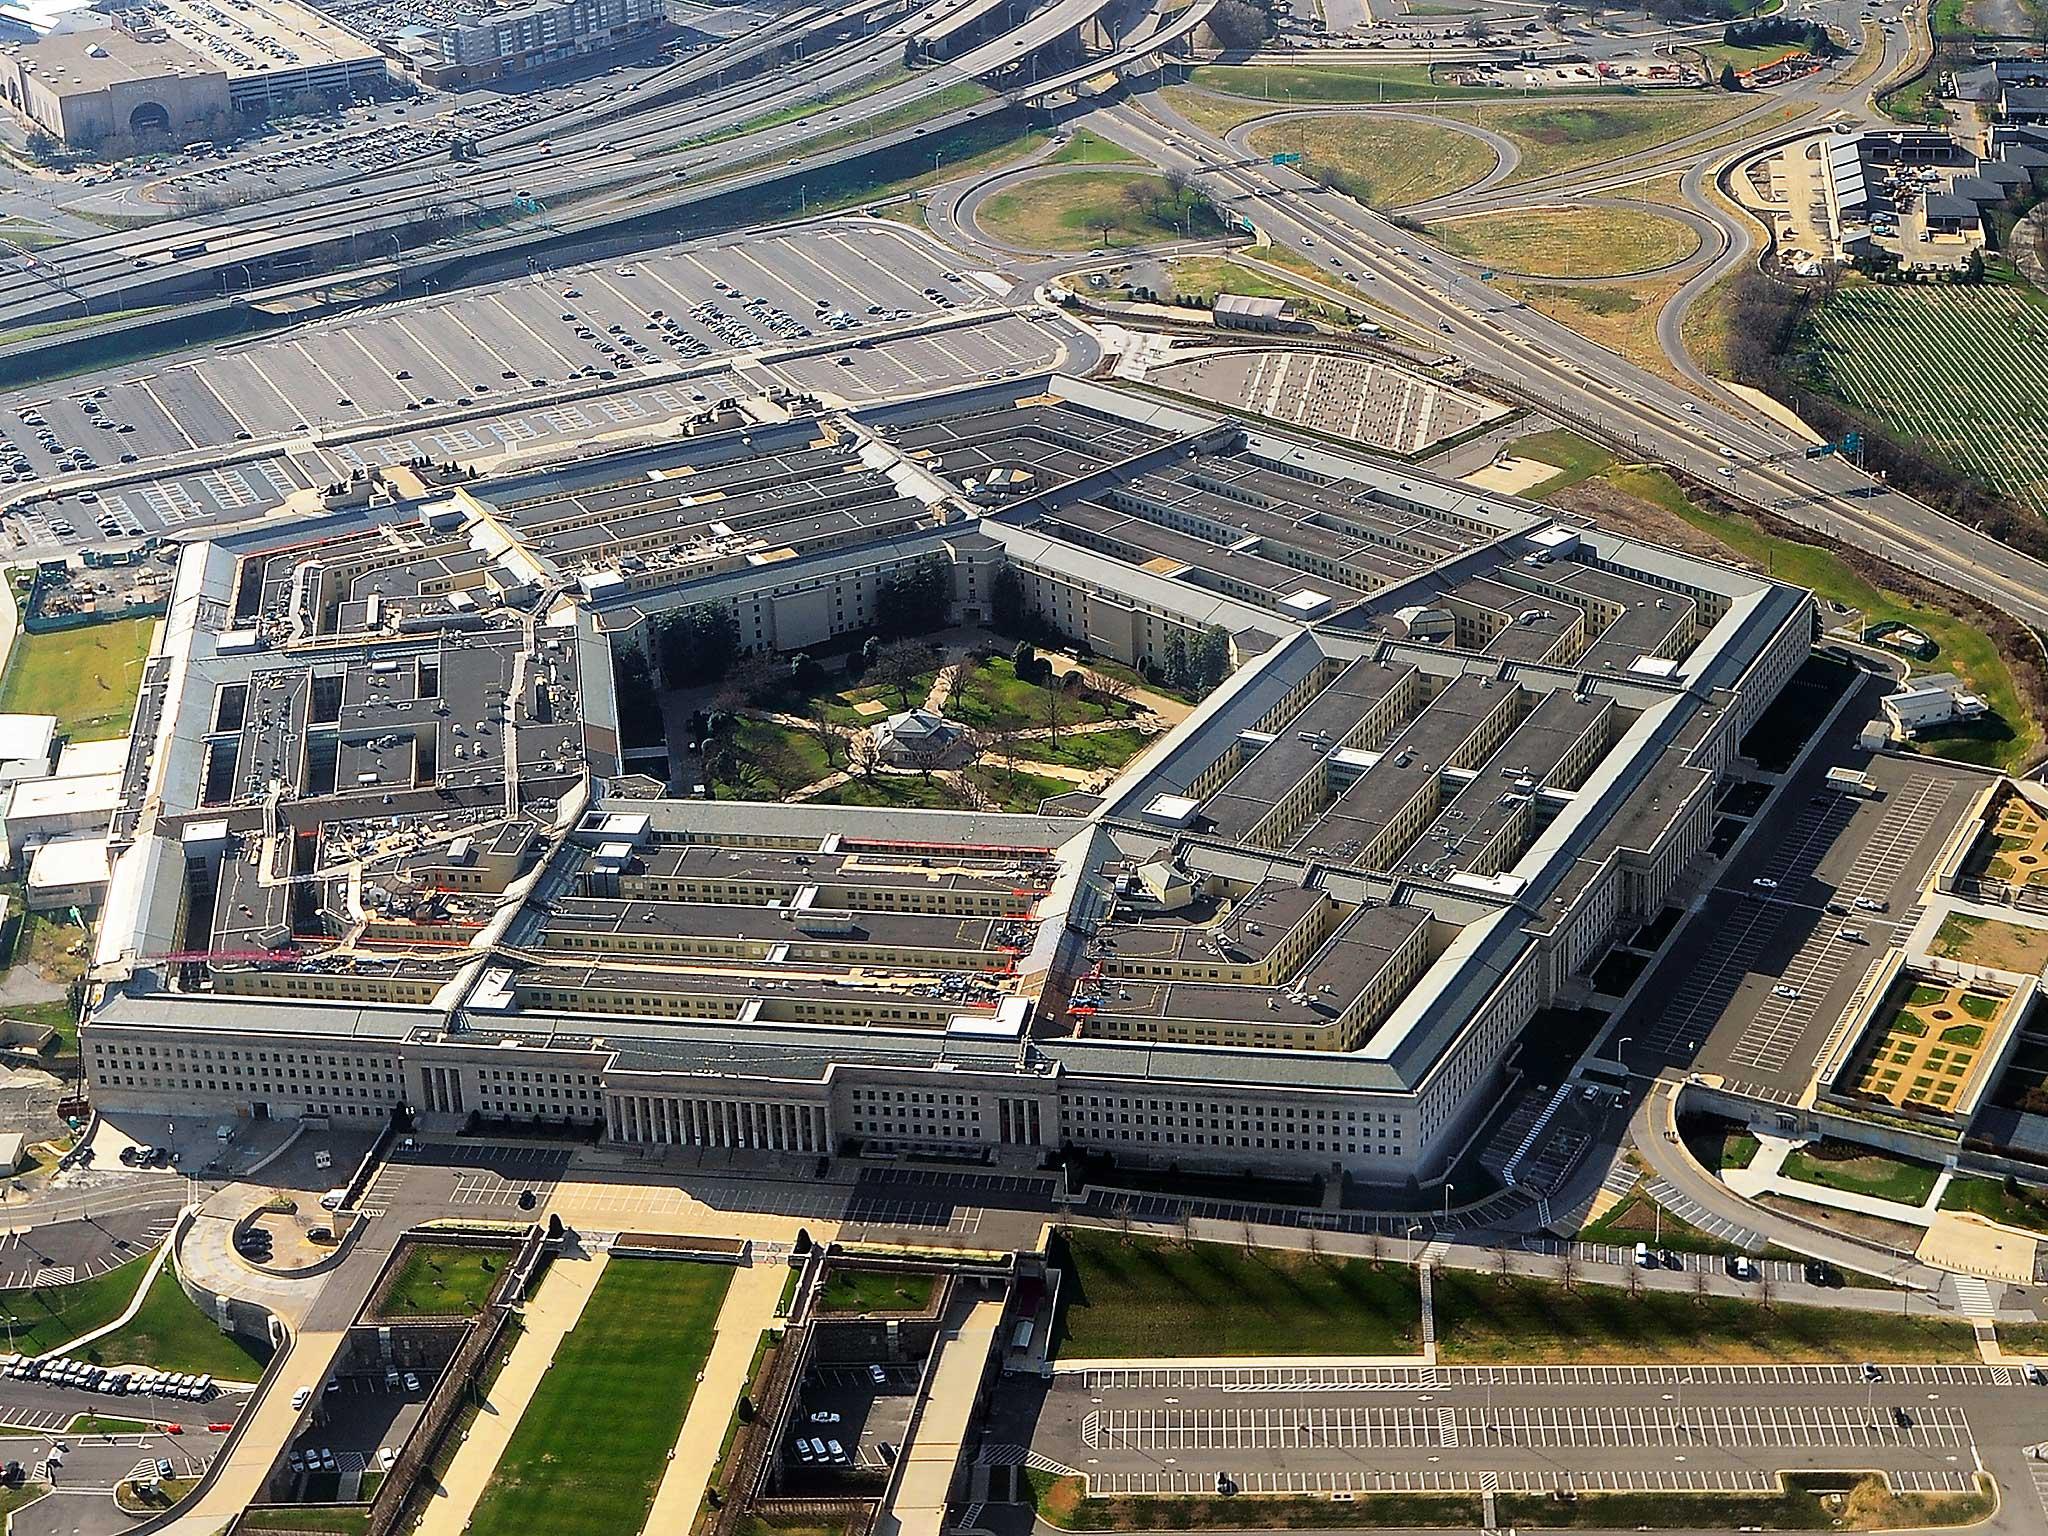 An aerial view of The Pentagon building in Washington, USA